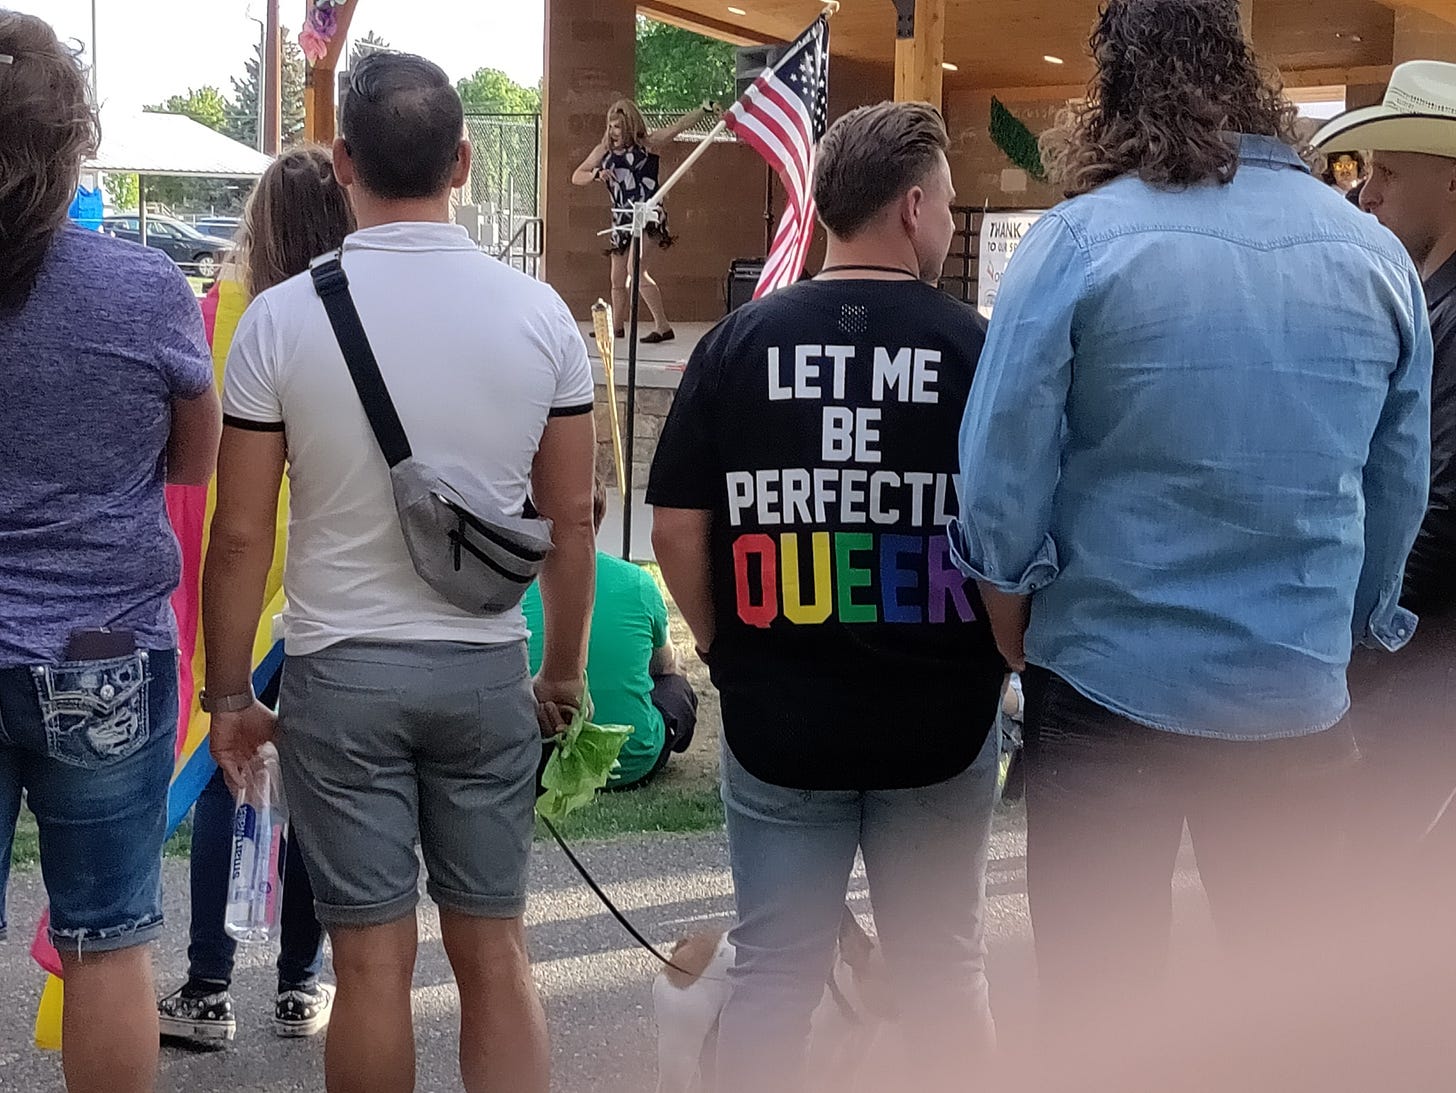 May be an image of 5 people, crowd and text that says 'H THANK LET ME BE PERFECTL OU'